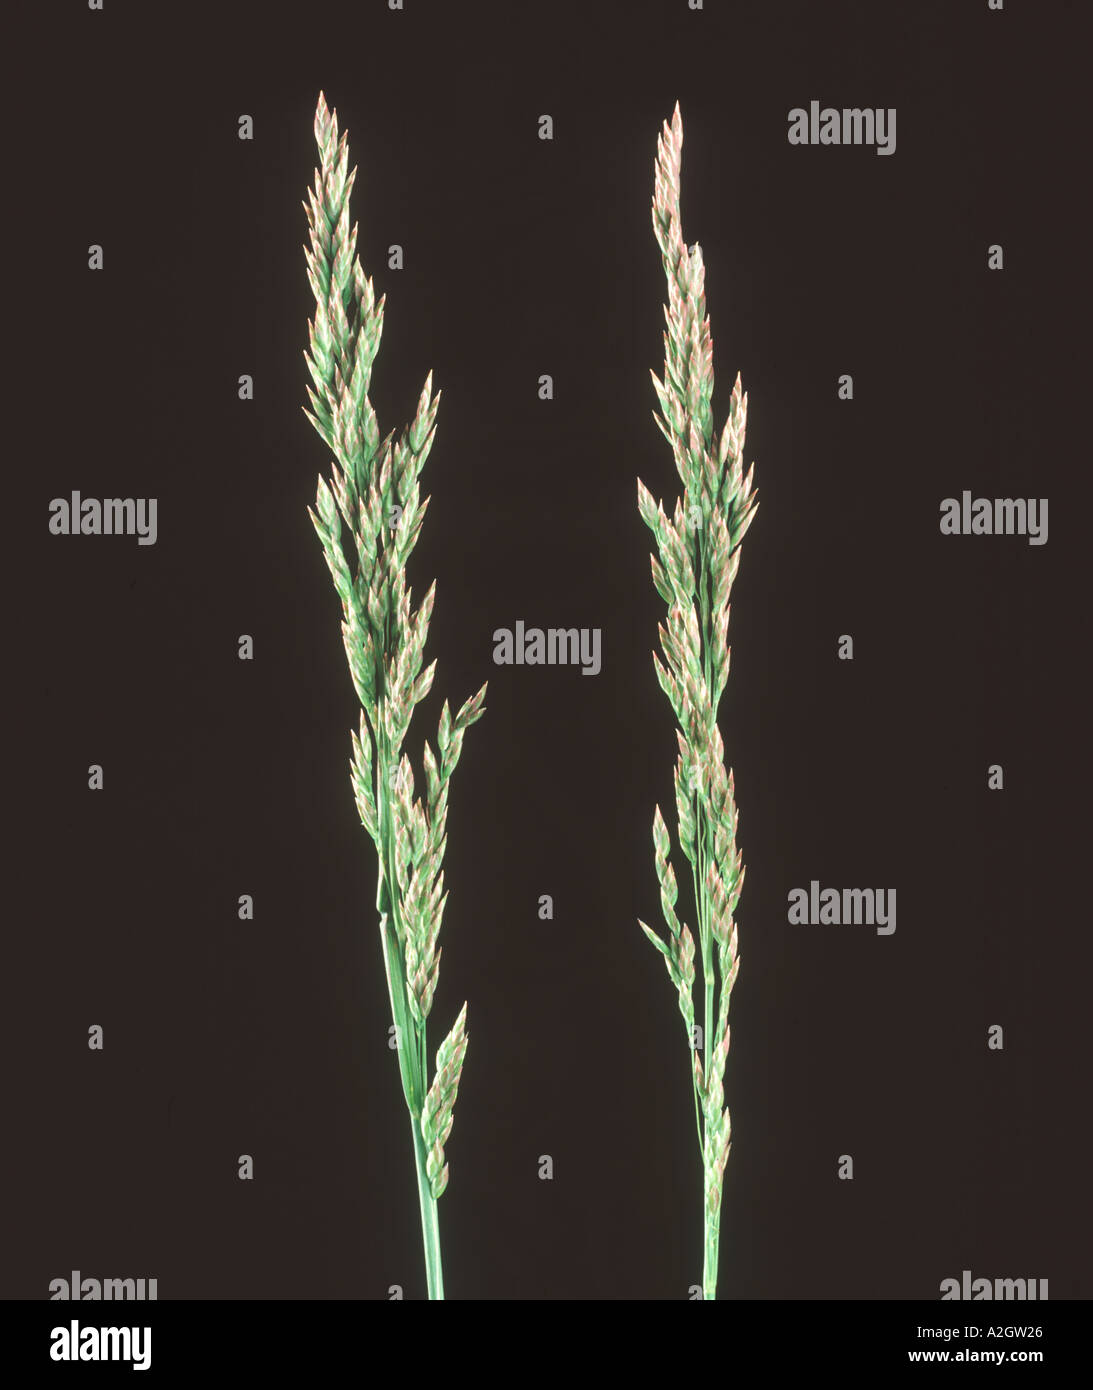 Unopened flower spikes of smooth meadow grass Poa pratensis Stock Photo